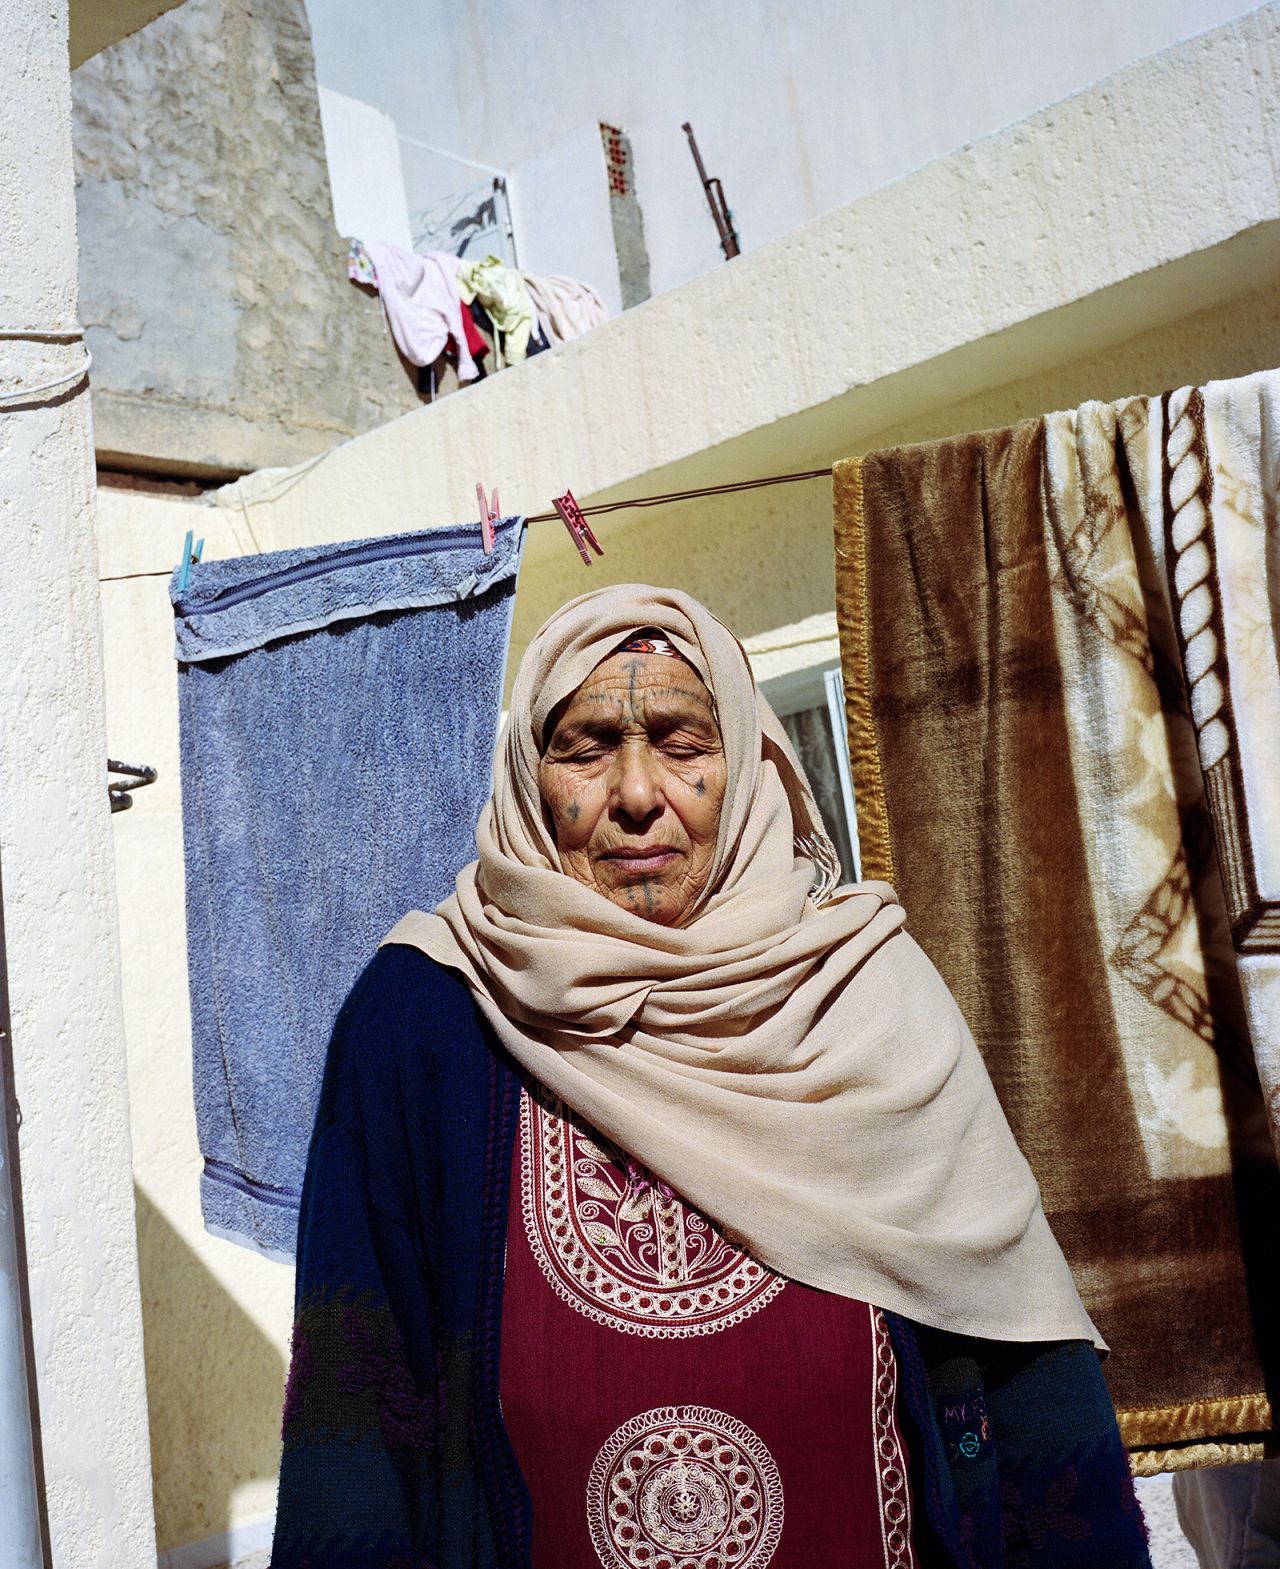 However, the majority of women had positive stories to tell. Al-Arashi met Aisha, pictured here, just outside of the Tunisian capital, Tunis. Aisha said she received her tattoos after marriage to symbolize her womanhood.